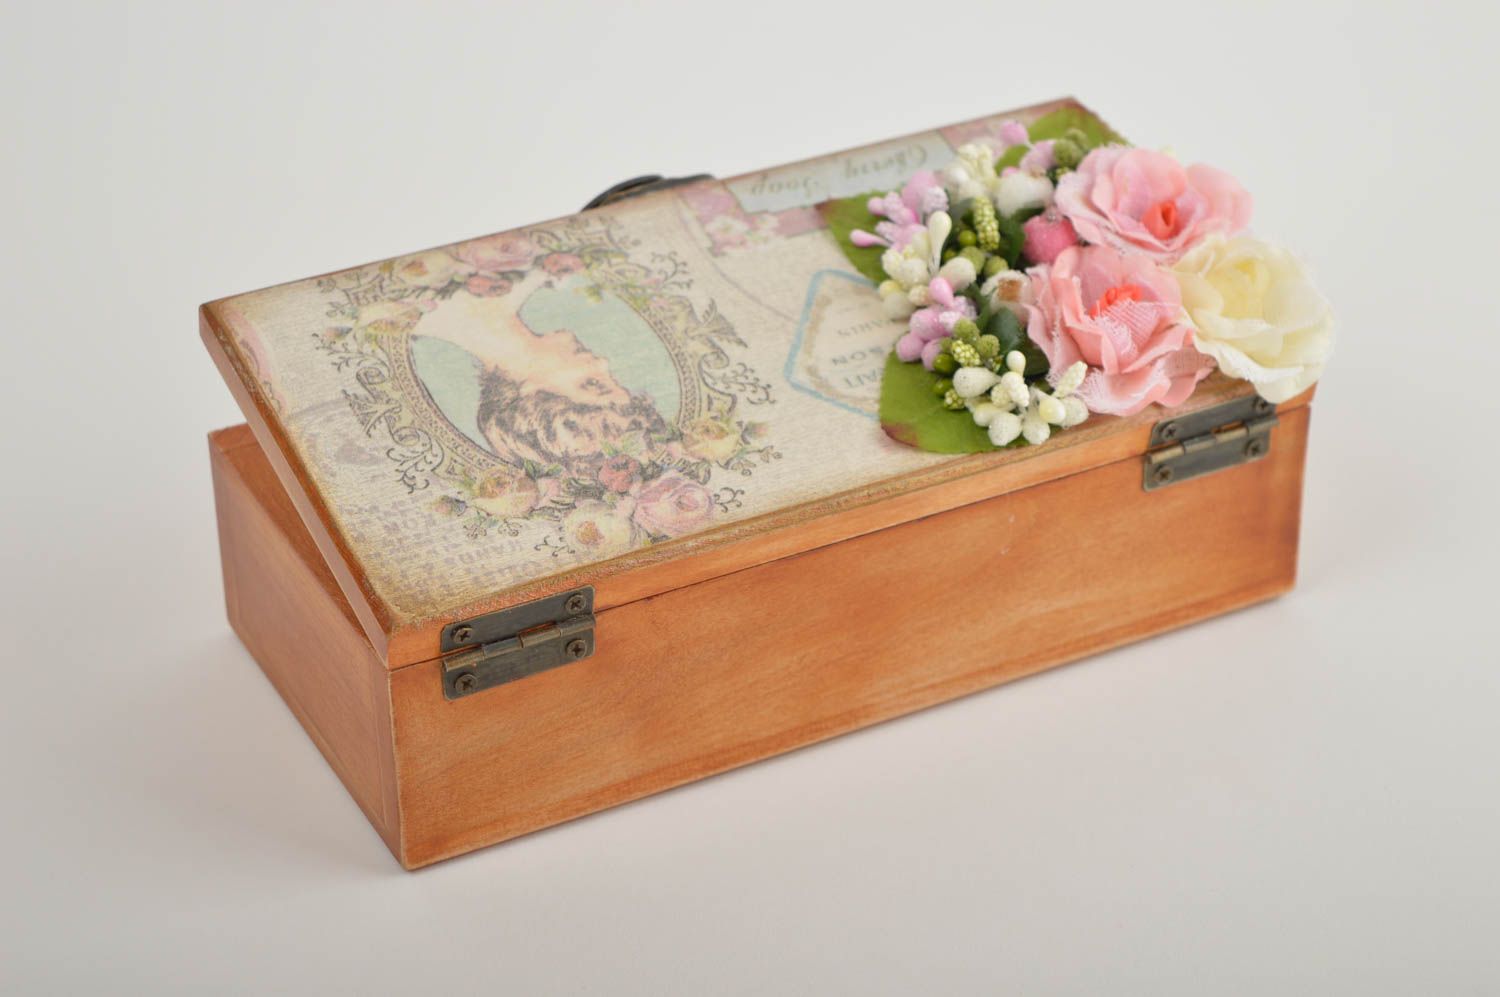 Handmade wooden jewelry box jewelry gift box vintage jewelry box gifts for her photo 3